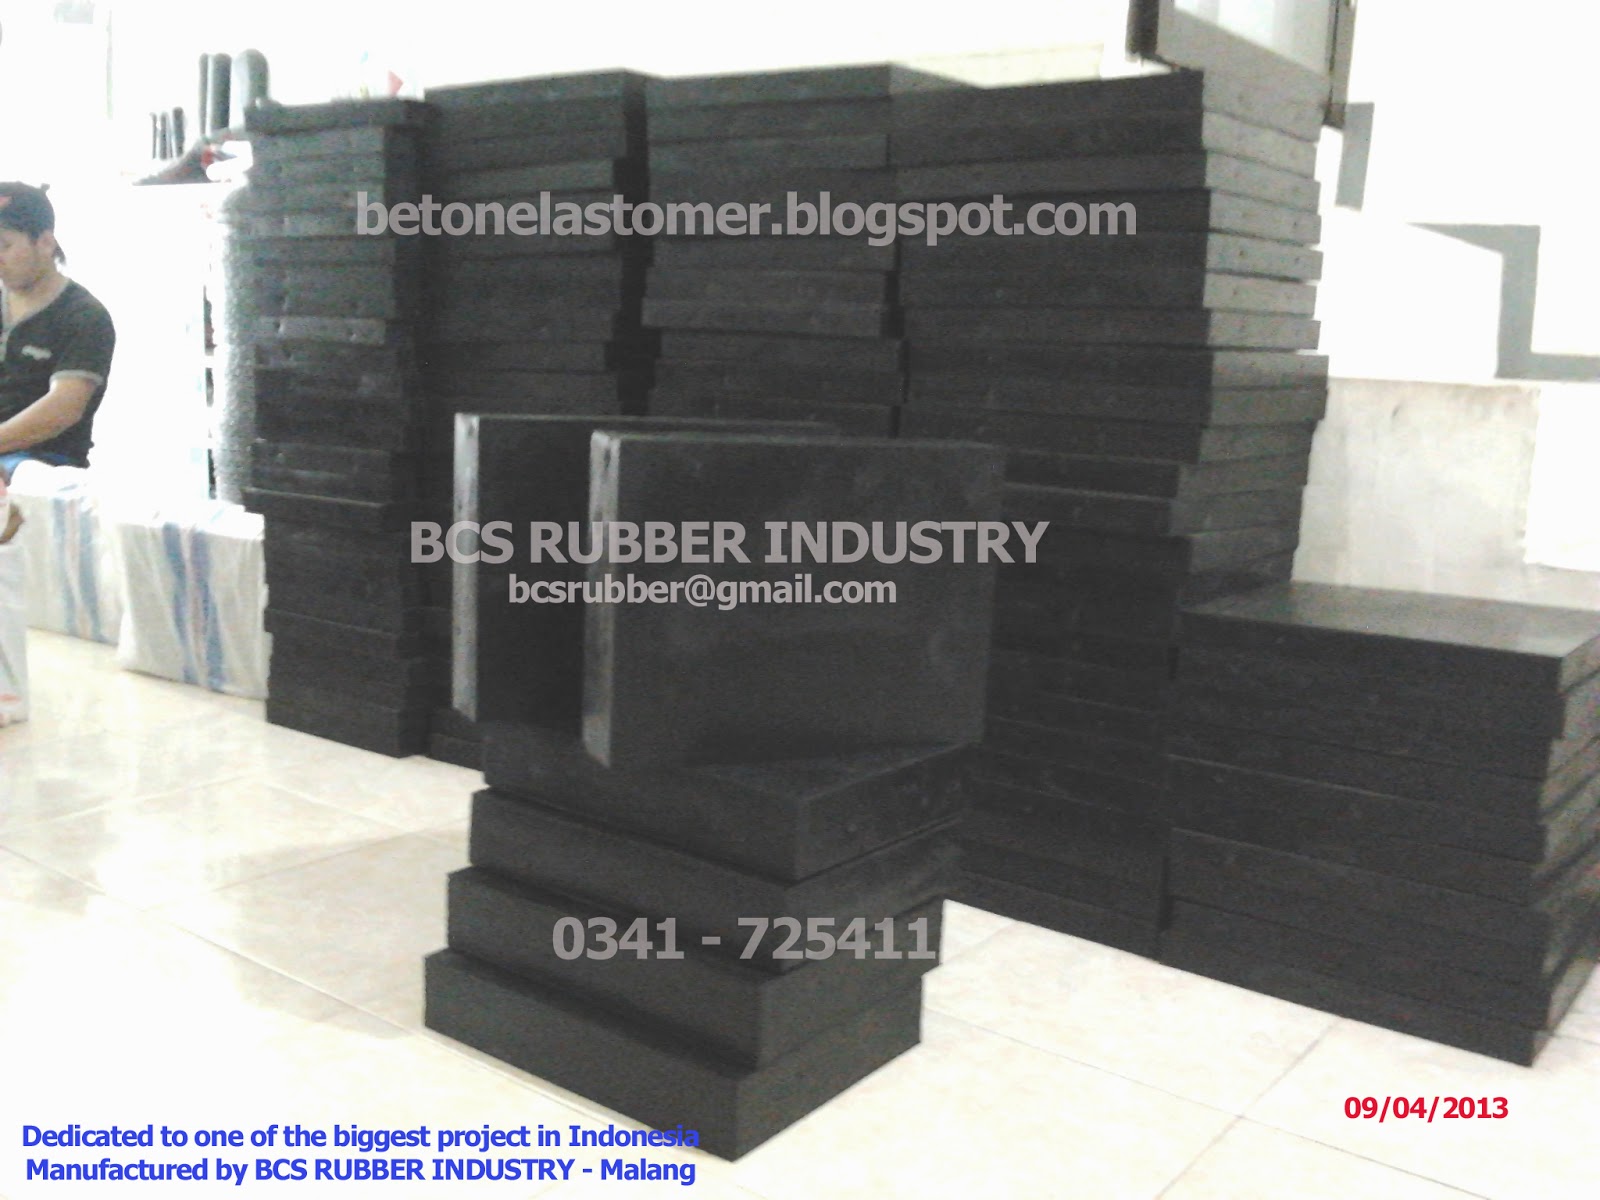 Elastomer Bearing Pad BCS Rubber #Special and Competitive Price #Good Quality 